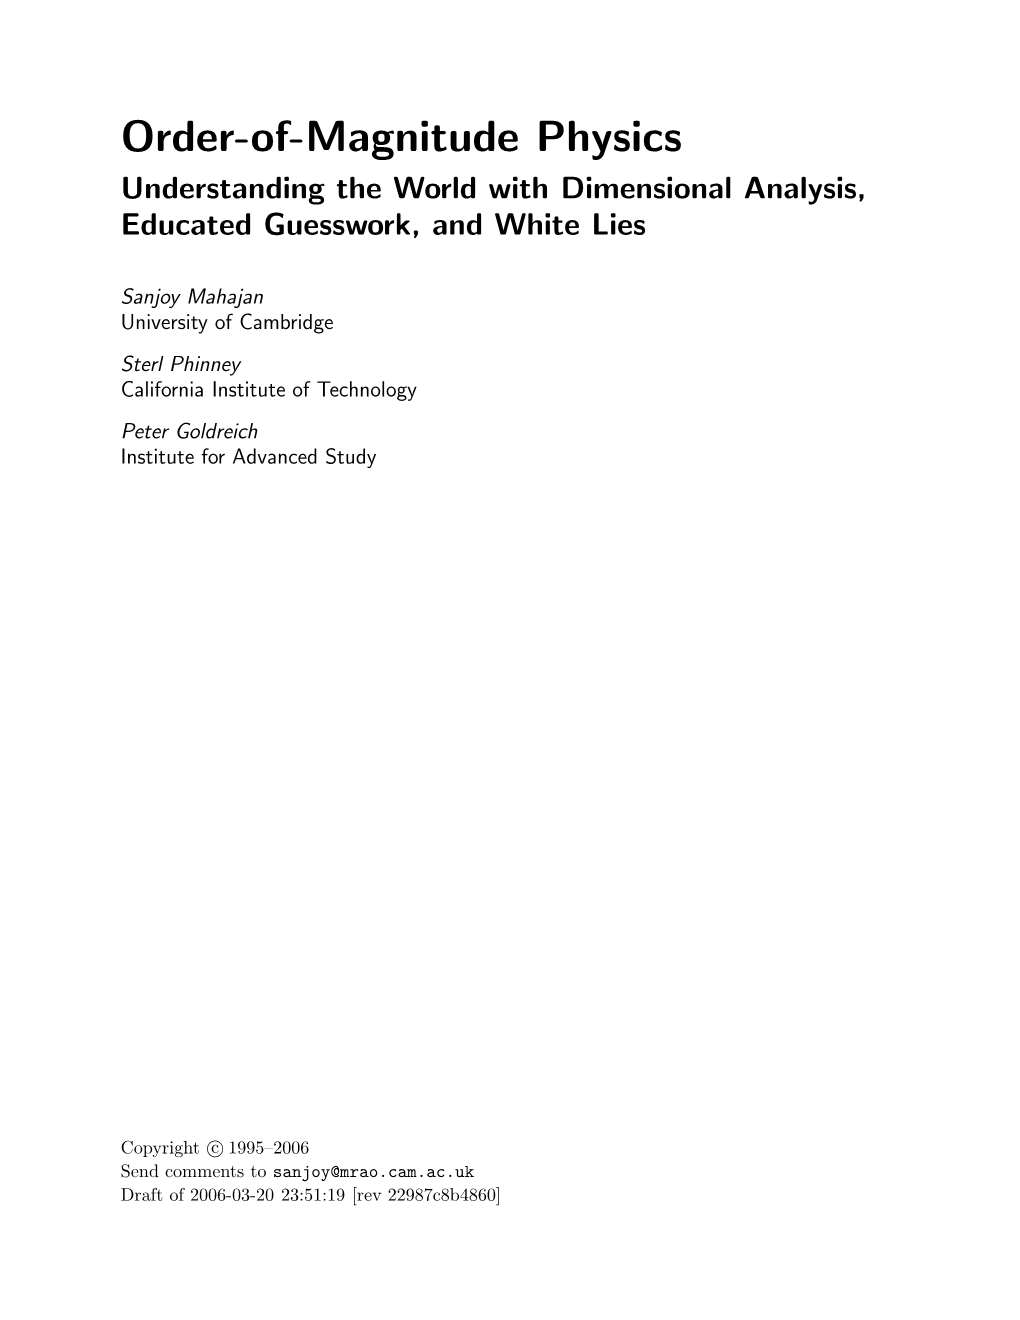 Order-Of-Magnitude Physics Understanding the World with Dimensional Analysis, Educated Guesswork, and White Lies